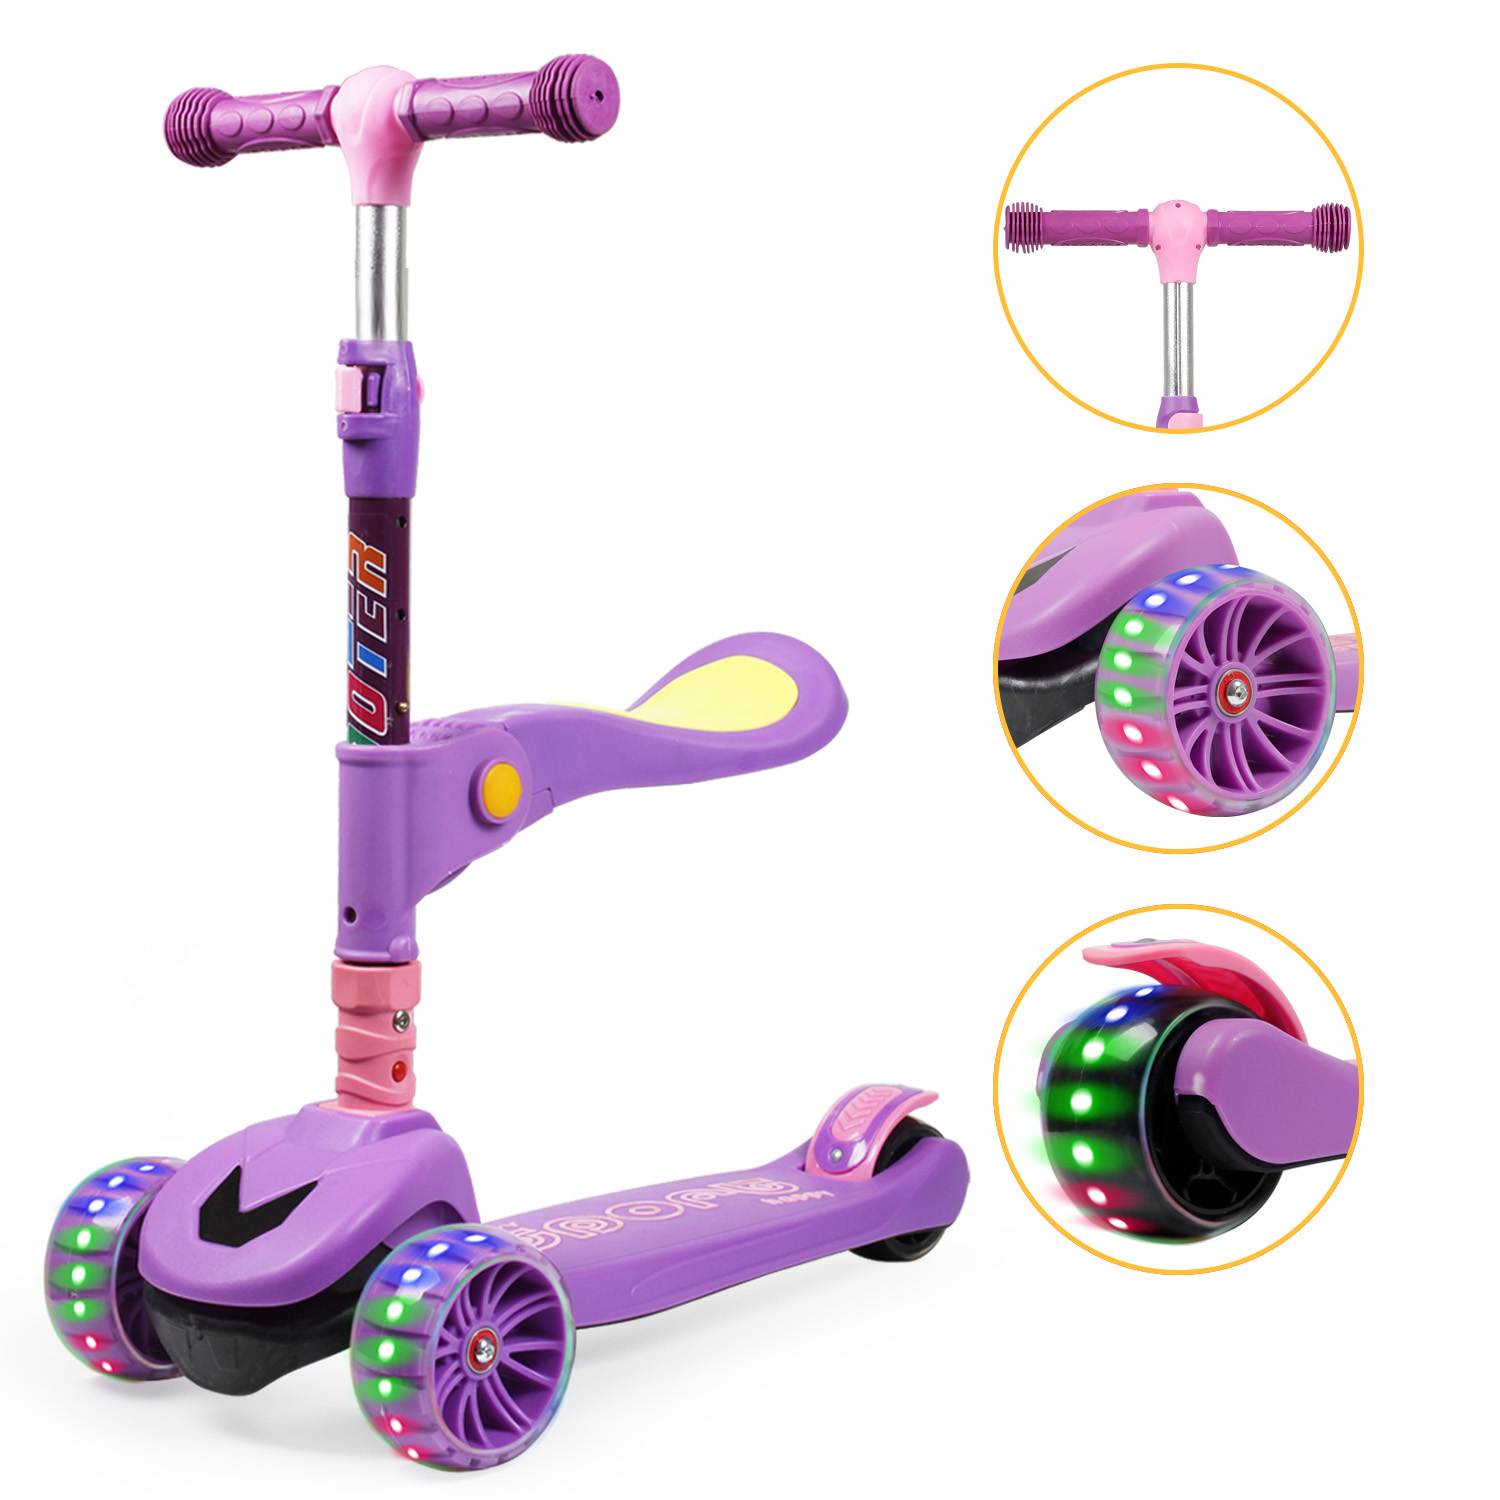 Details about   3-Wheel LED Scooter for Kids Toy Deluxe Folding Adjustable Glider Kick US Stock 